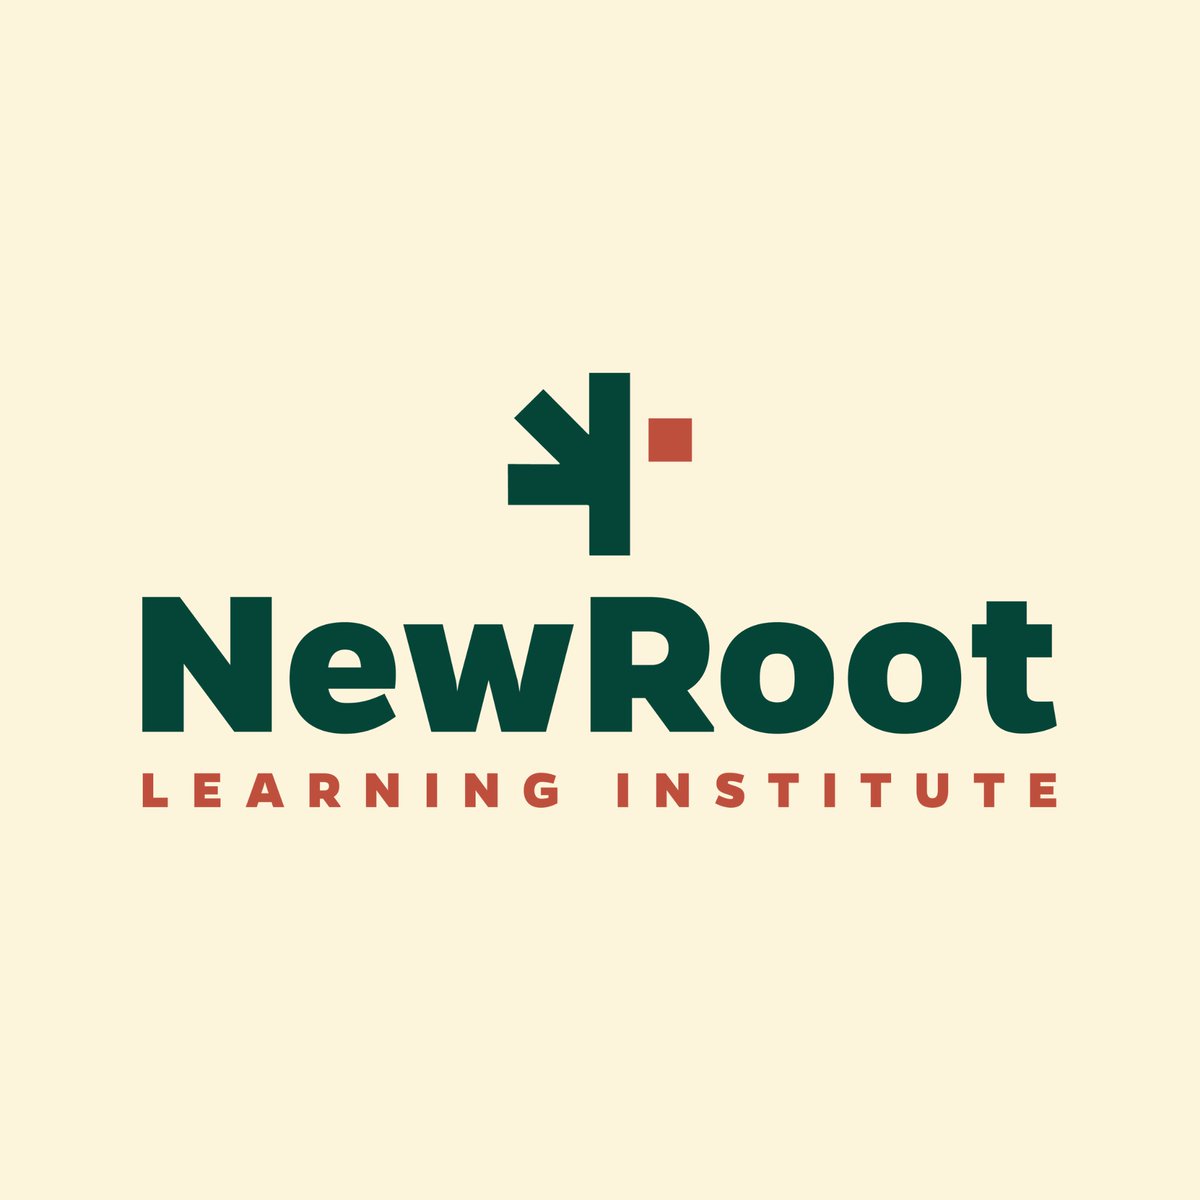 Today, we unveil to you a new look, name, and feel for our organization!! With our new name, NewRoot Learning Institute, we remain grounded in our commitment to students and communities in a manner that promotes equity and cultivates new roots. Together, we are #NewRoot!